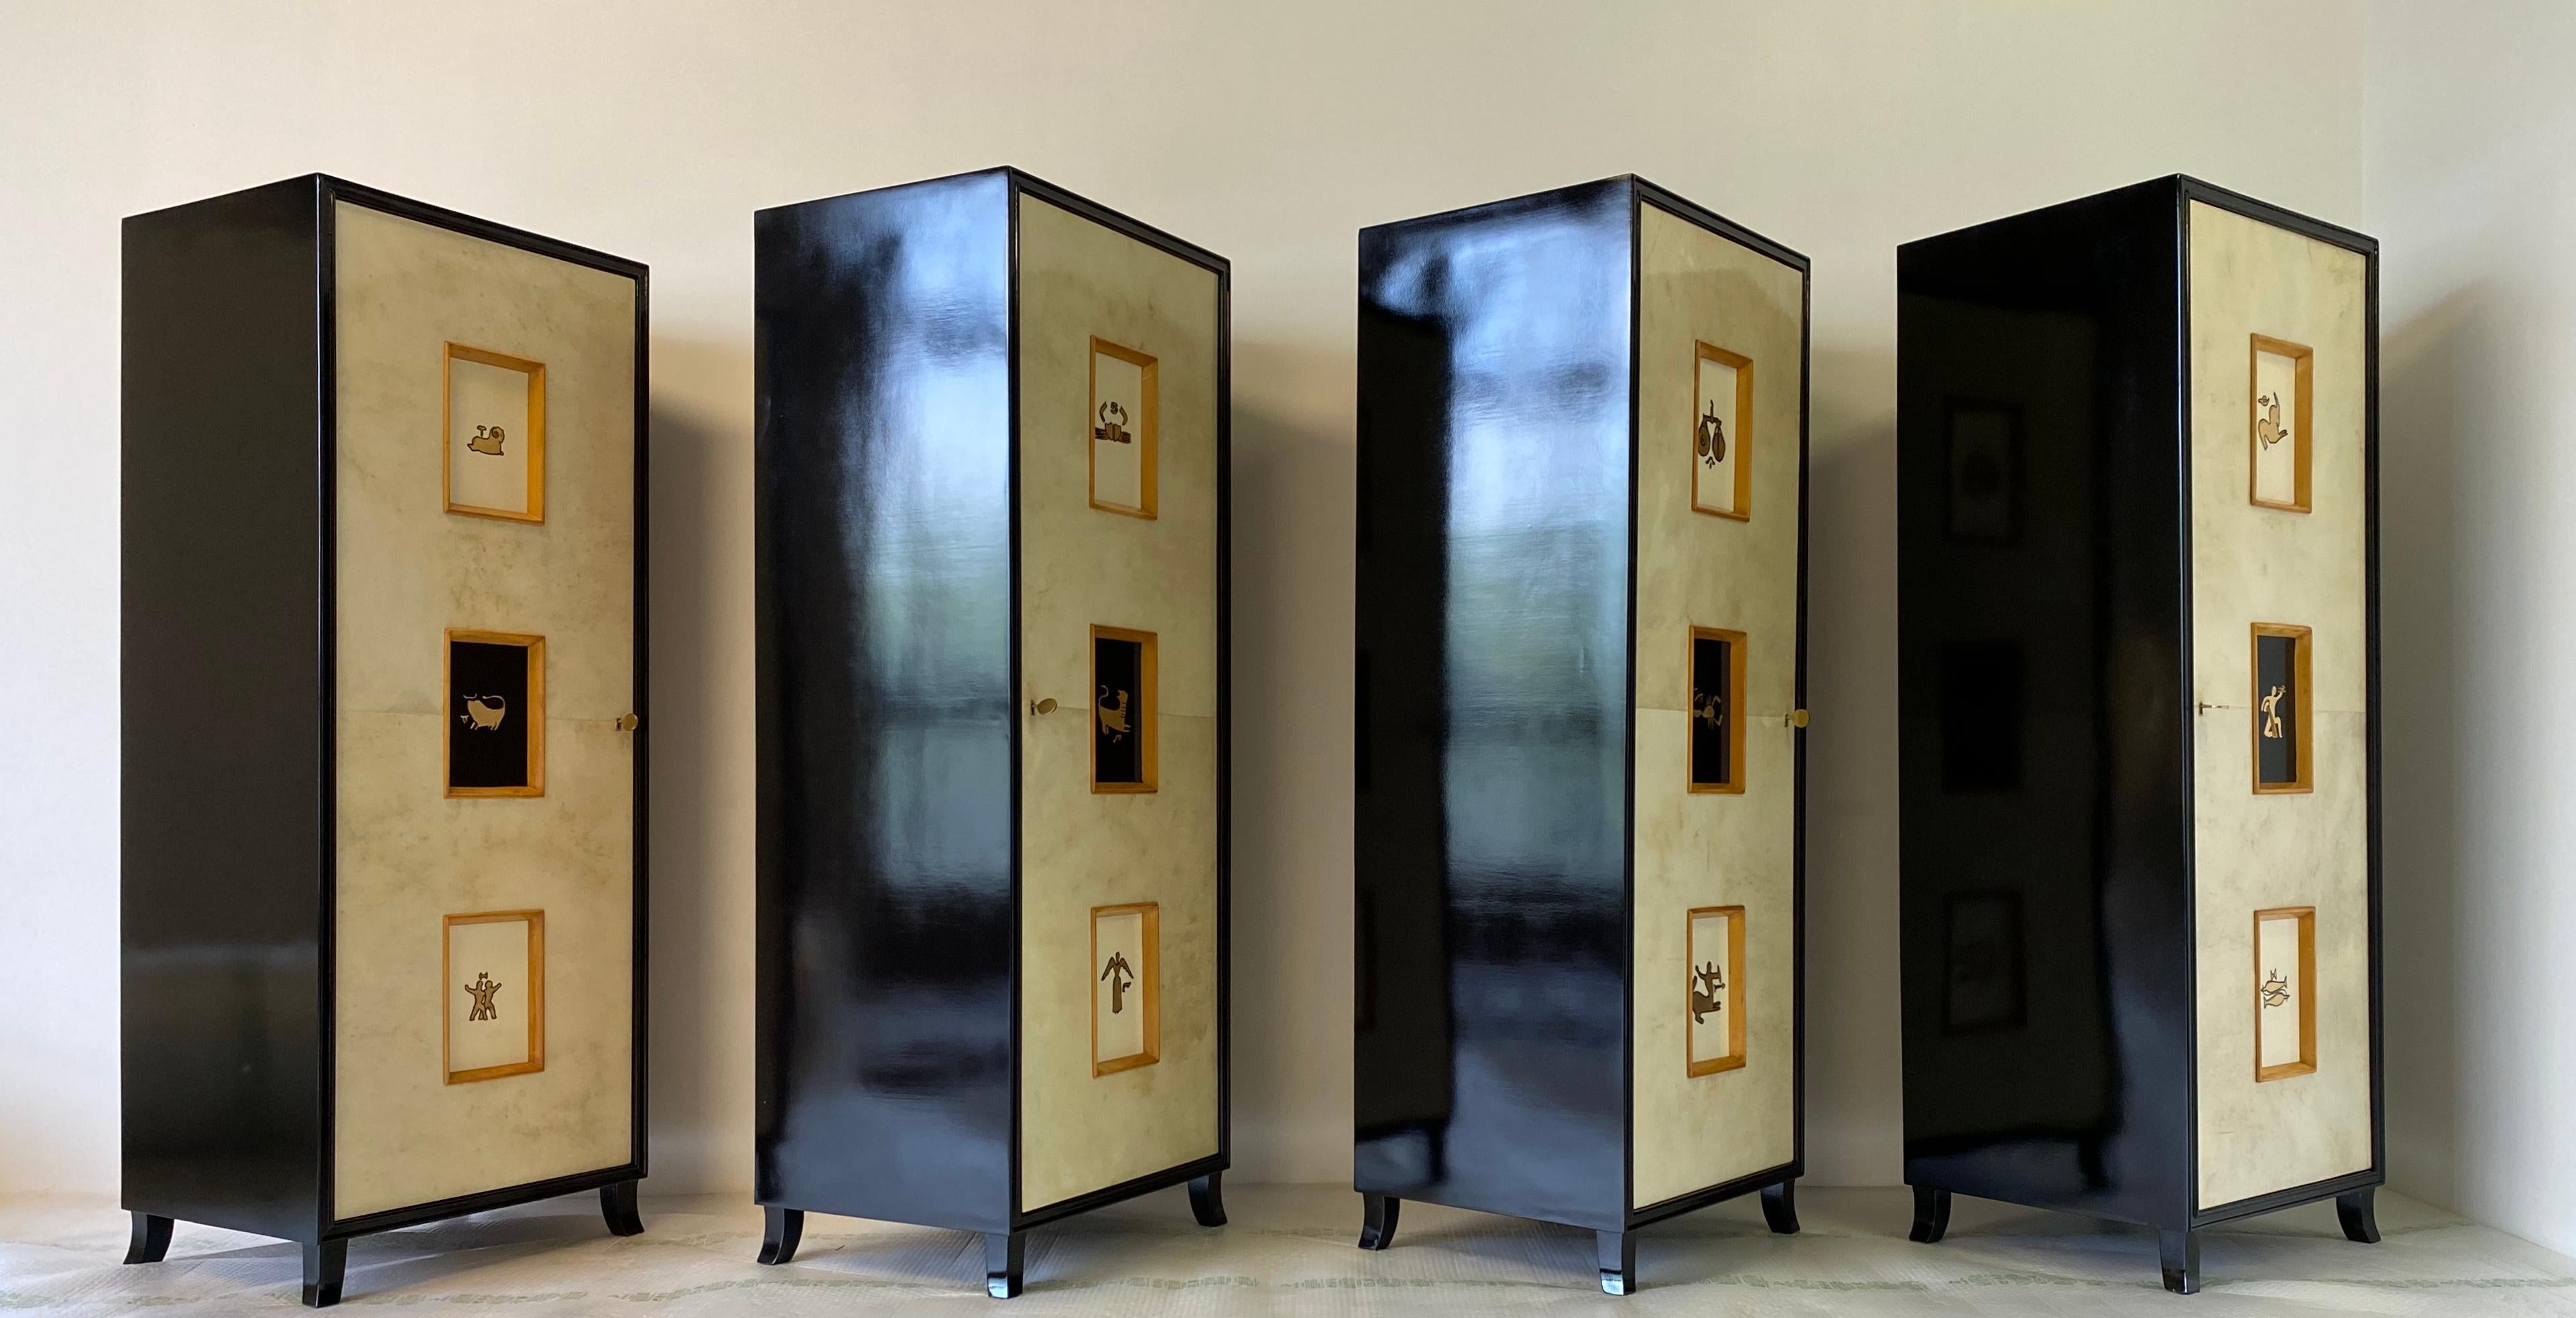 This rare set of four parchment cabinets was produced in the 1940s in Italy.
The front is covered in parchment while the structure is black lacquered.
The central decorations represent the 12 zodiac signs and are handmade with gold leaf.
The